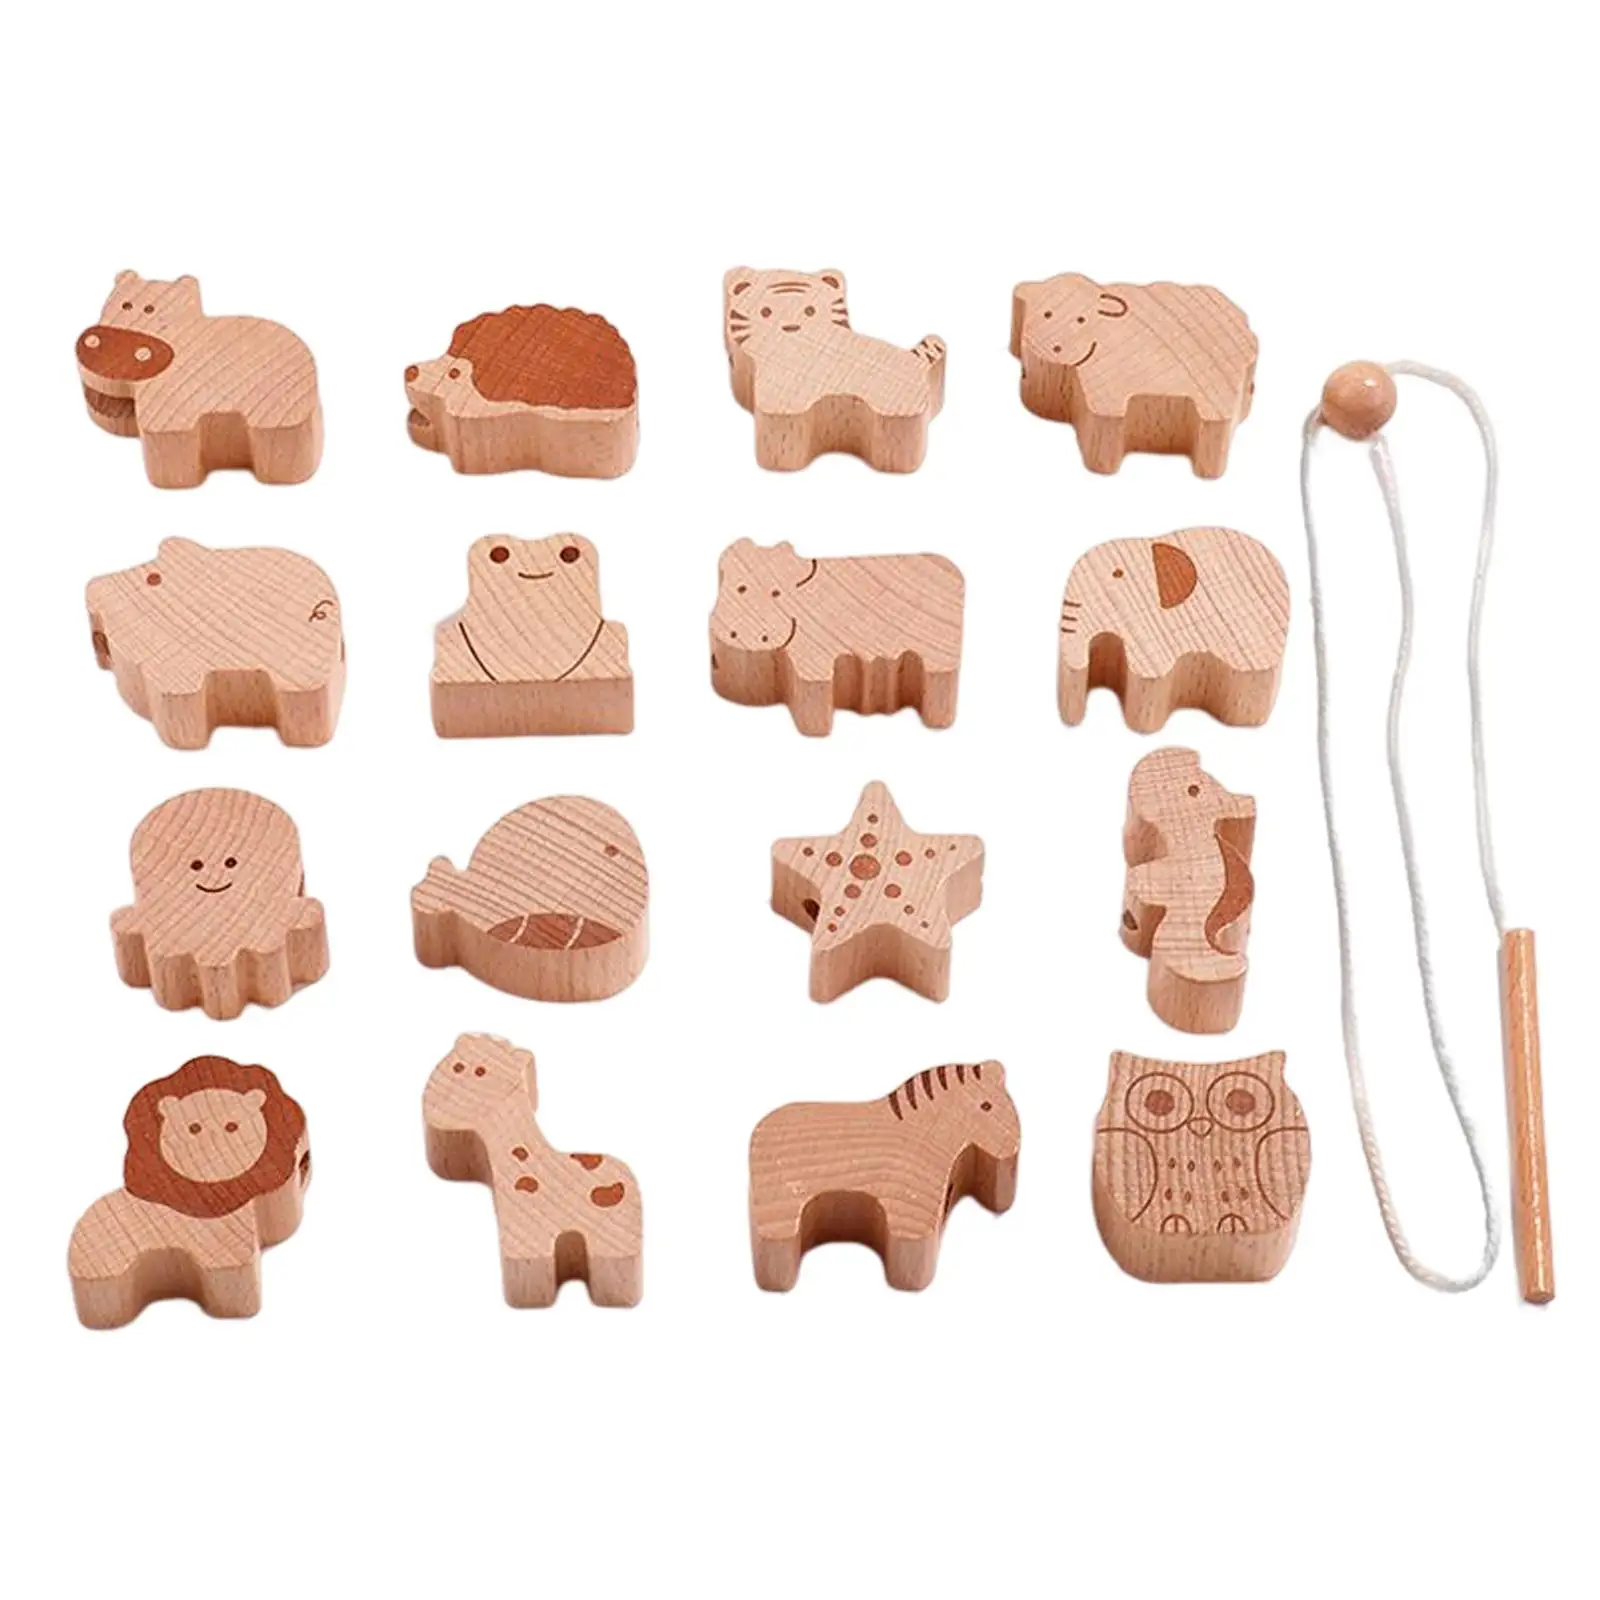 16x Wooden Animal Blocks Lacing Toy Wooden Stacker Game for Children Kids